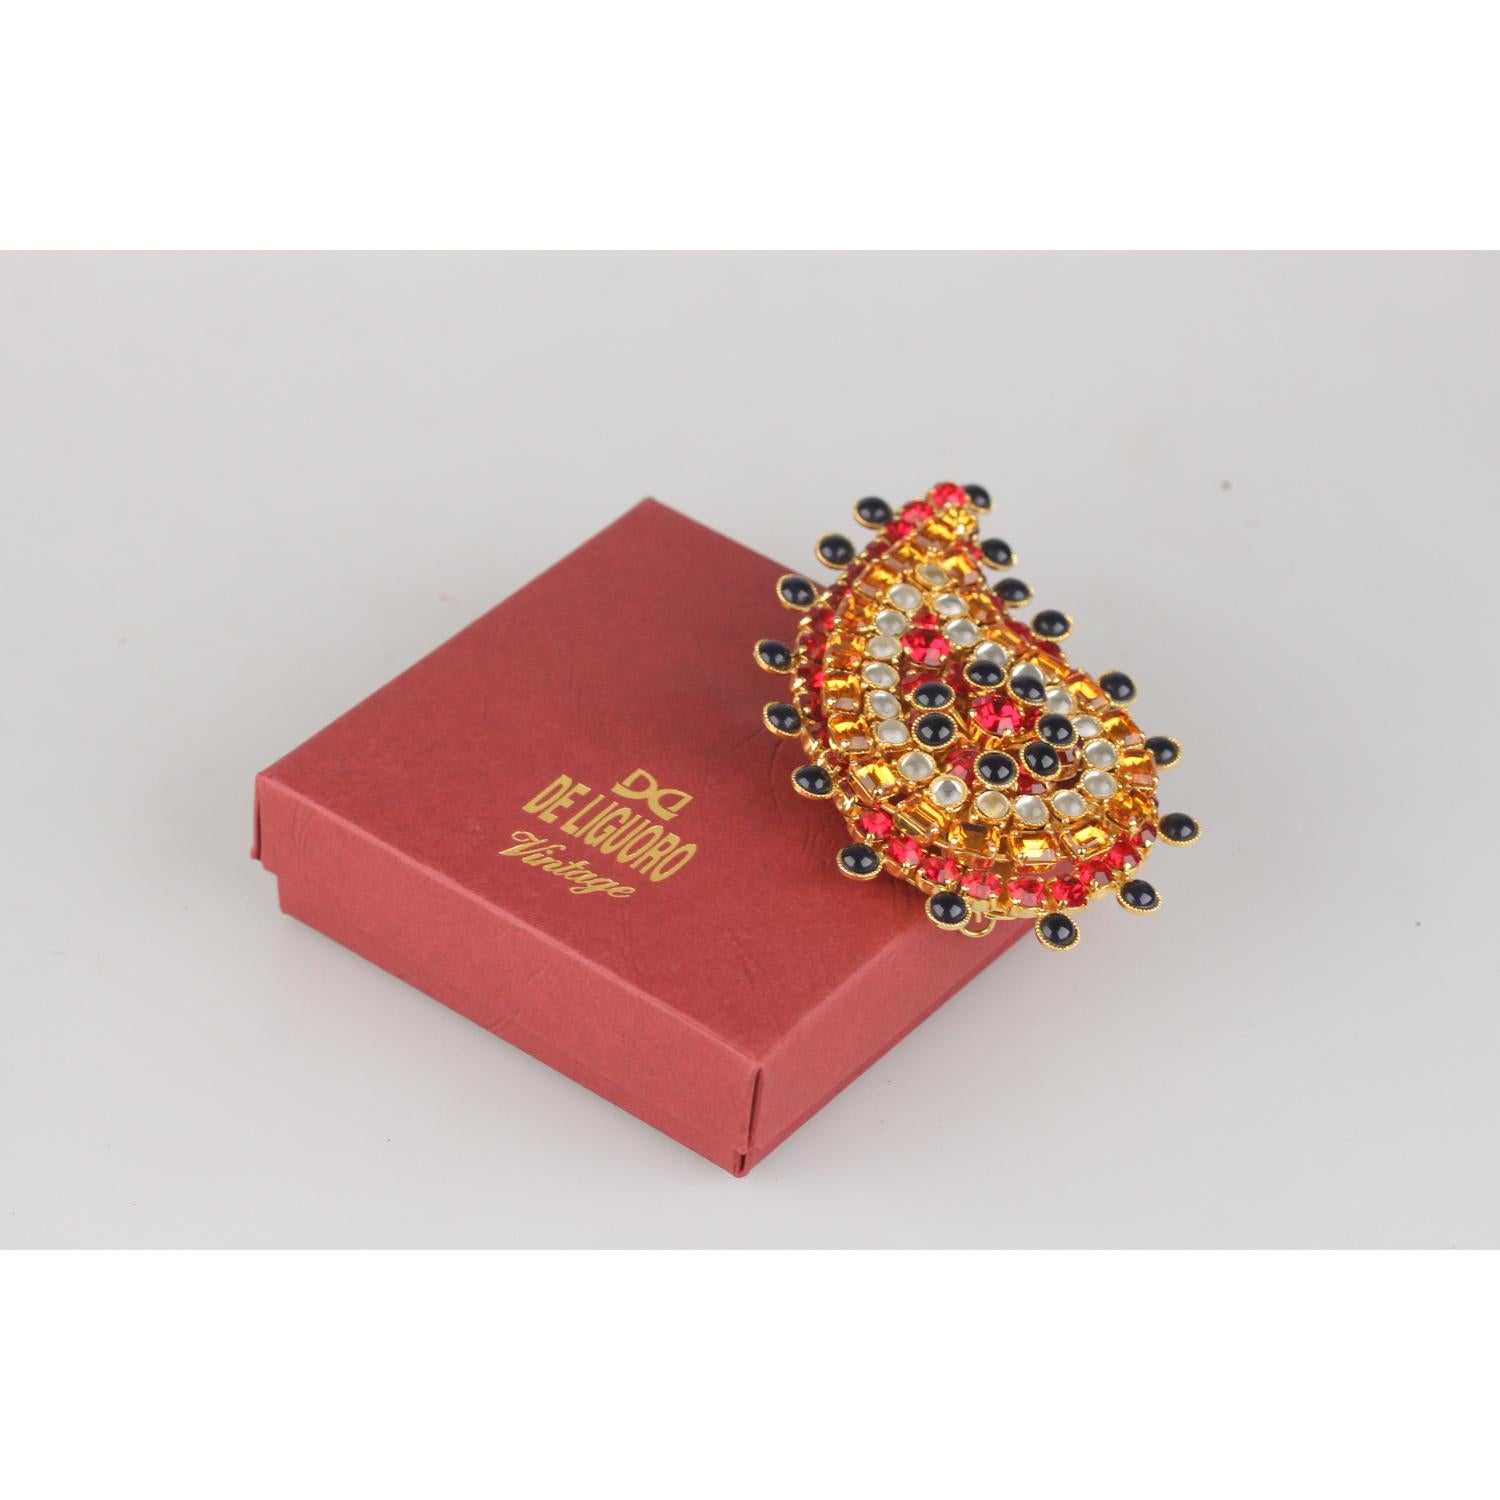 Rare 1980s Haute Couture Brooch created by Gianni De Liguoro for Rocco Barocco. Paisley design. Deep red and orange faceted crystal rhinestones and white and black glass cabochons. Gold-tone brass setting with safety pin closure on the back. De